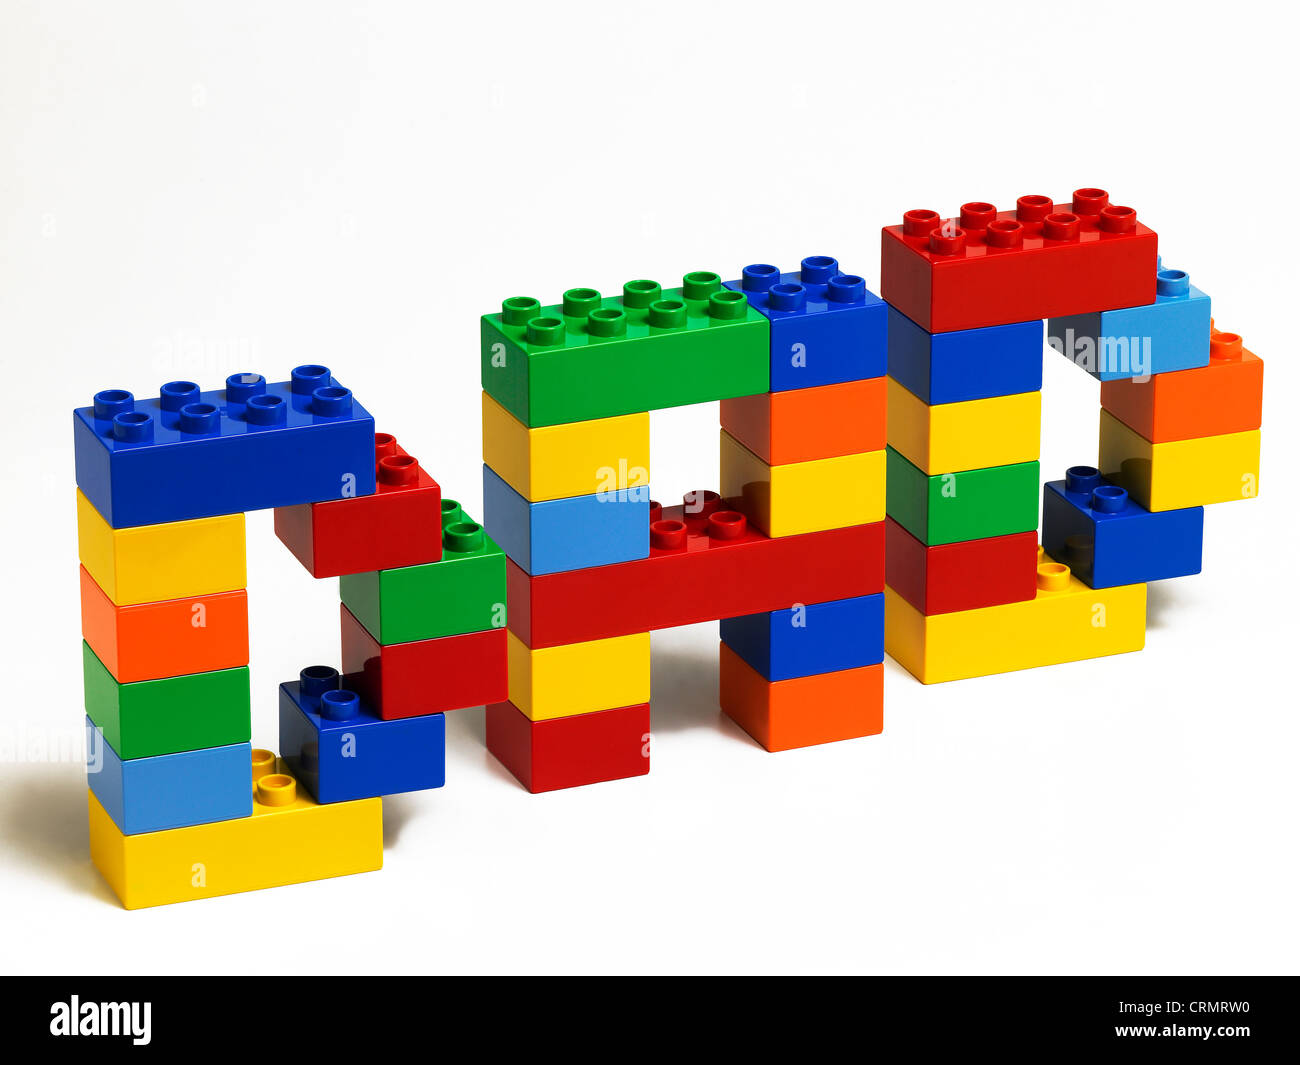 Lego Letters Stock Photos & Lego Letters Stock Images - Alamy